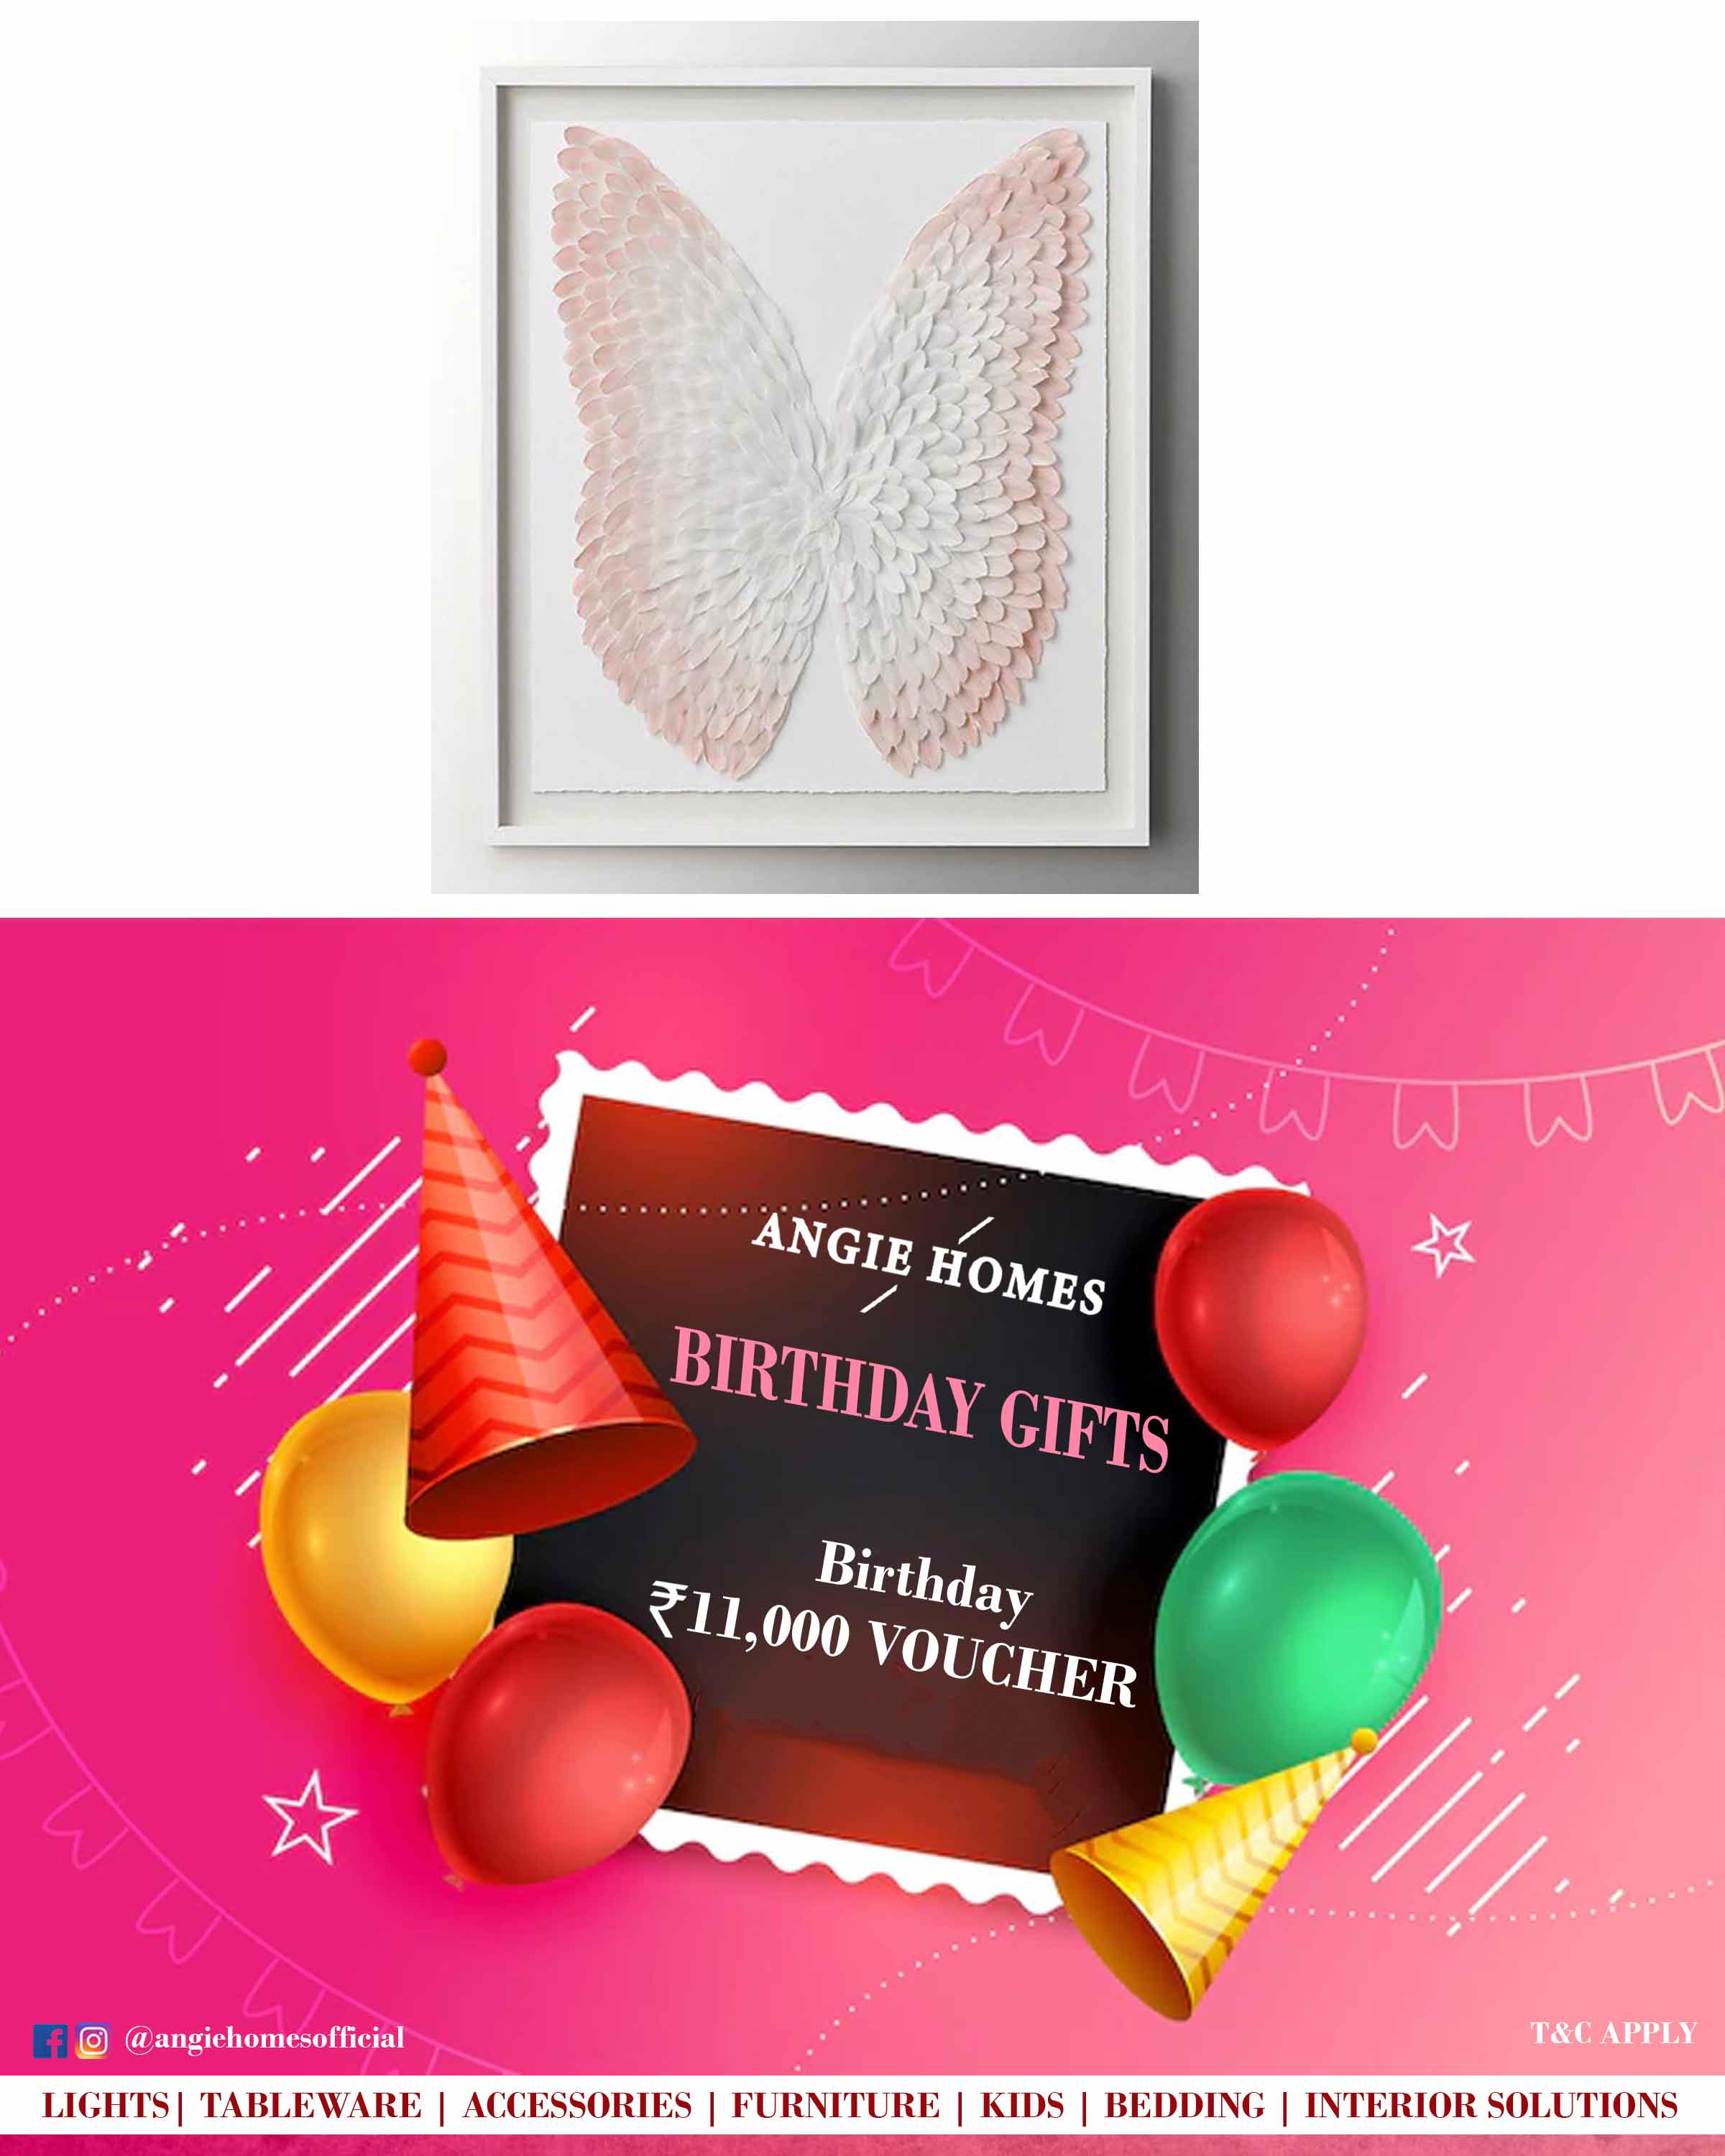 Beautiful Online Happy Birthday Gift Voucher for Butterfly Art Work ANGIE HOMES